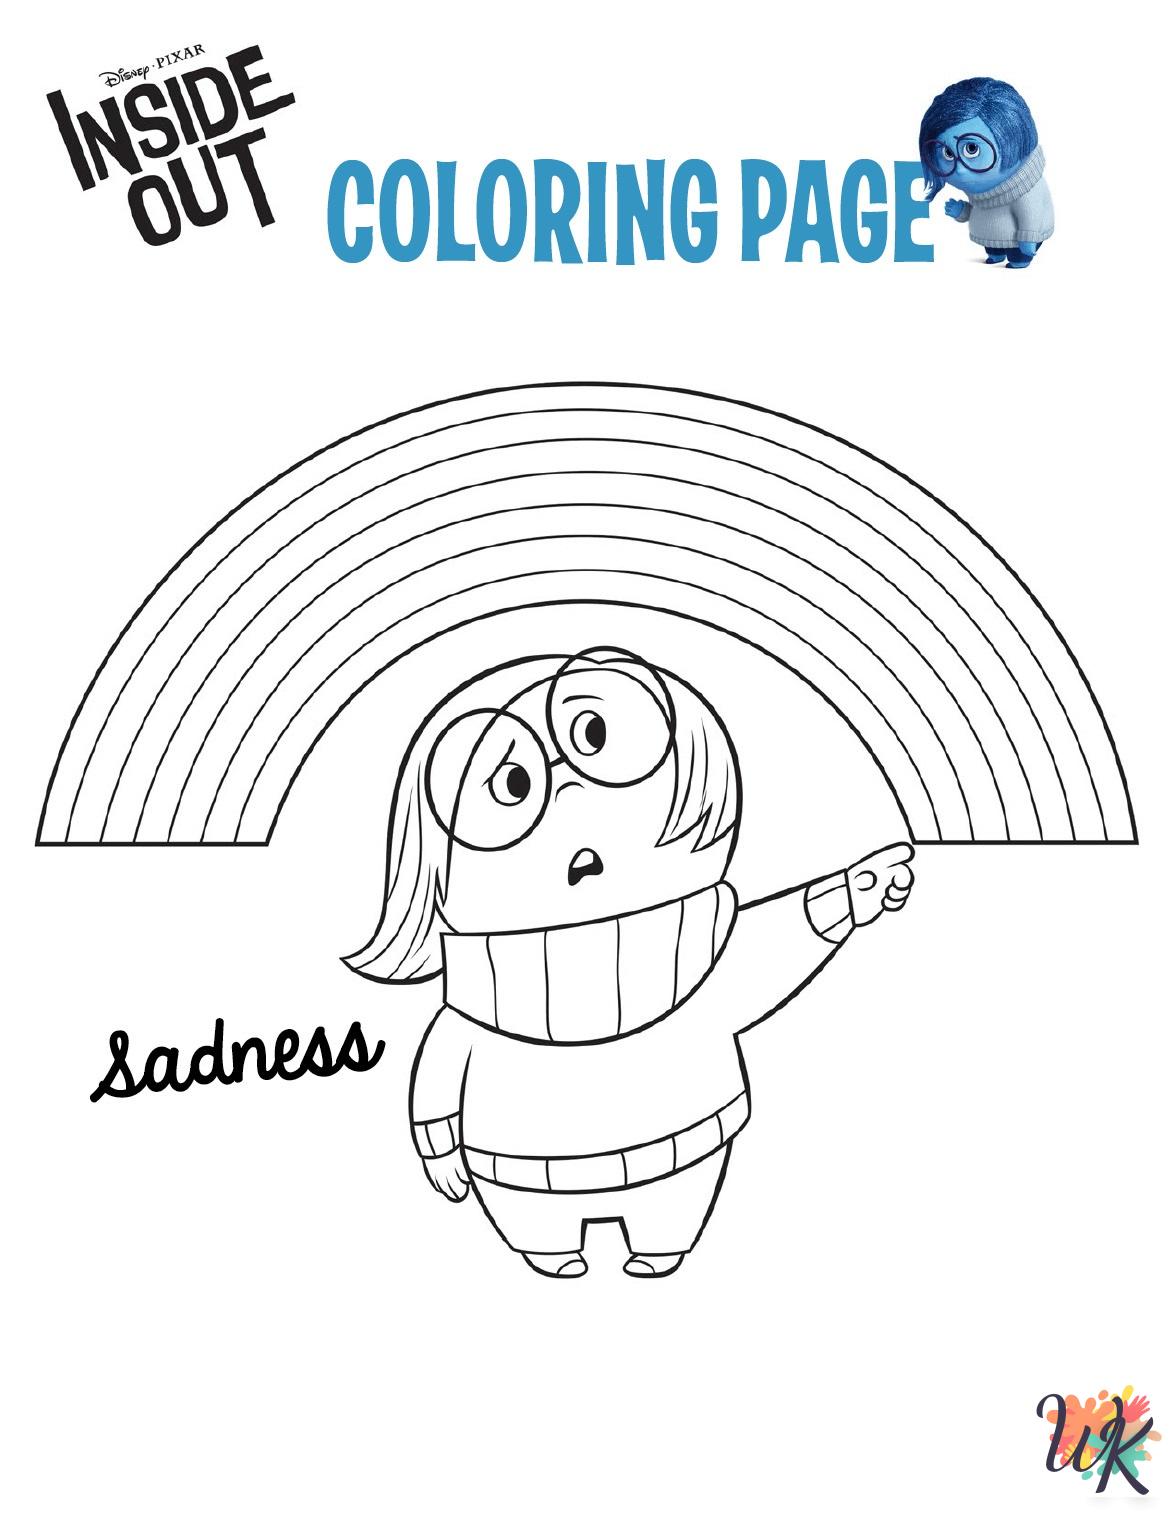 Inside Out coloring pages for kids